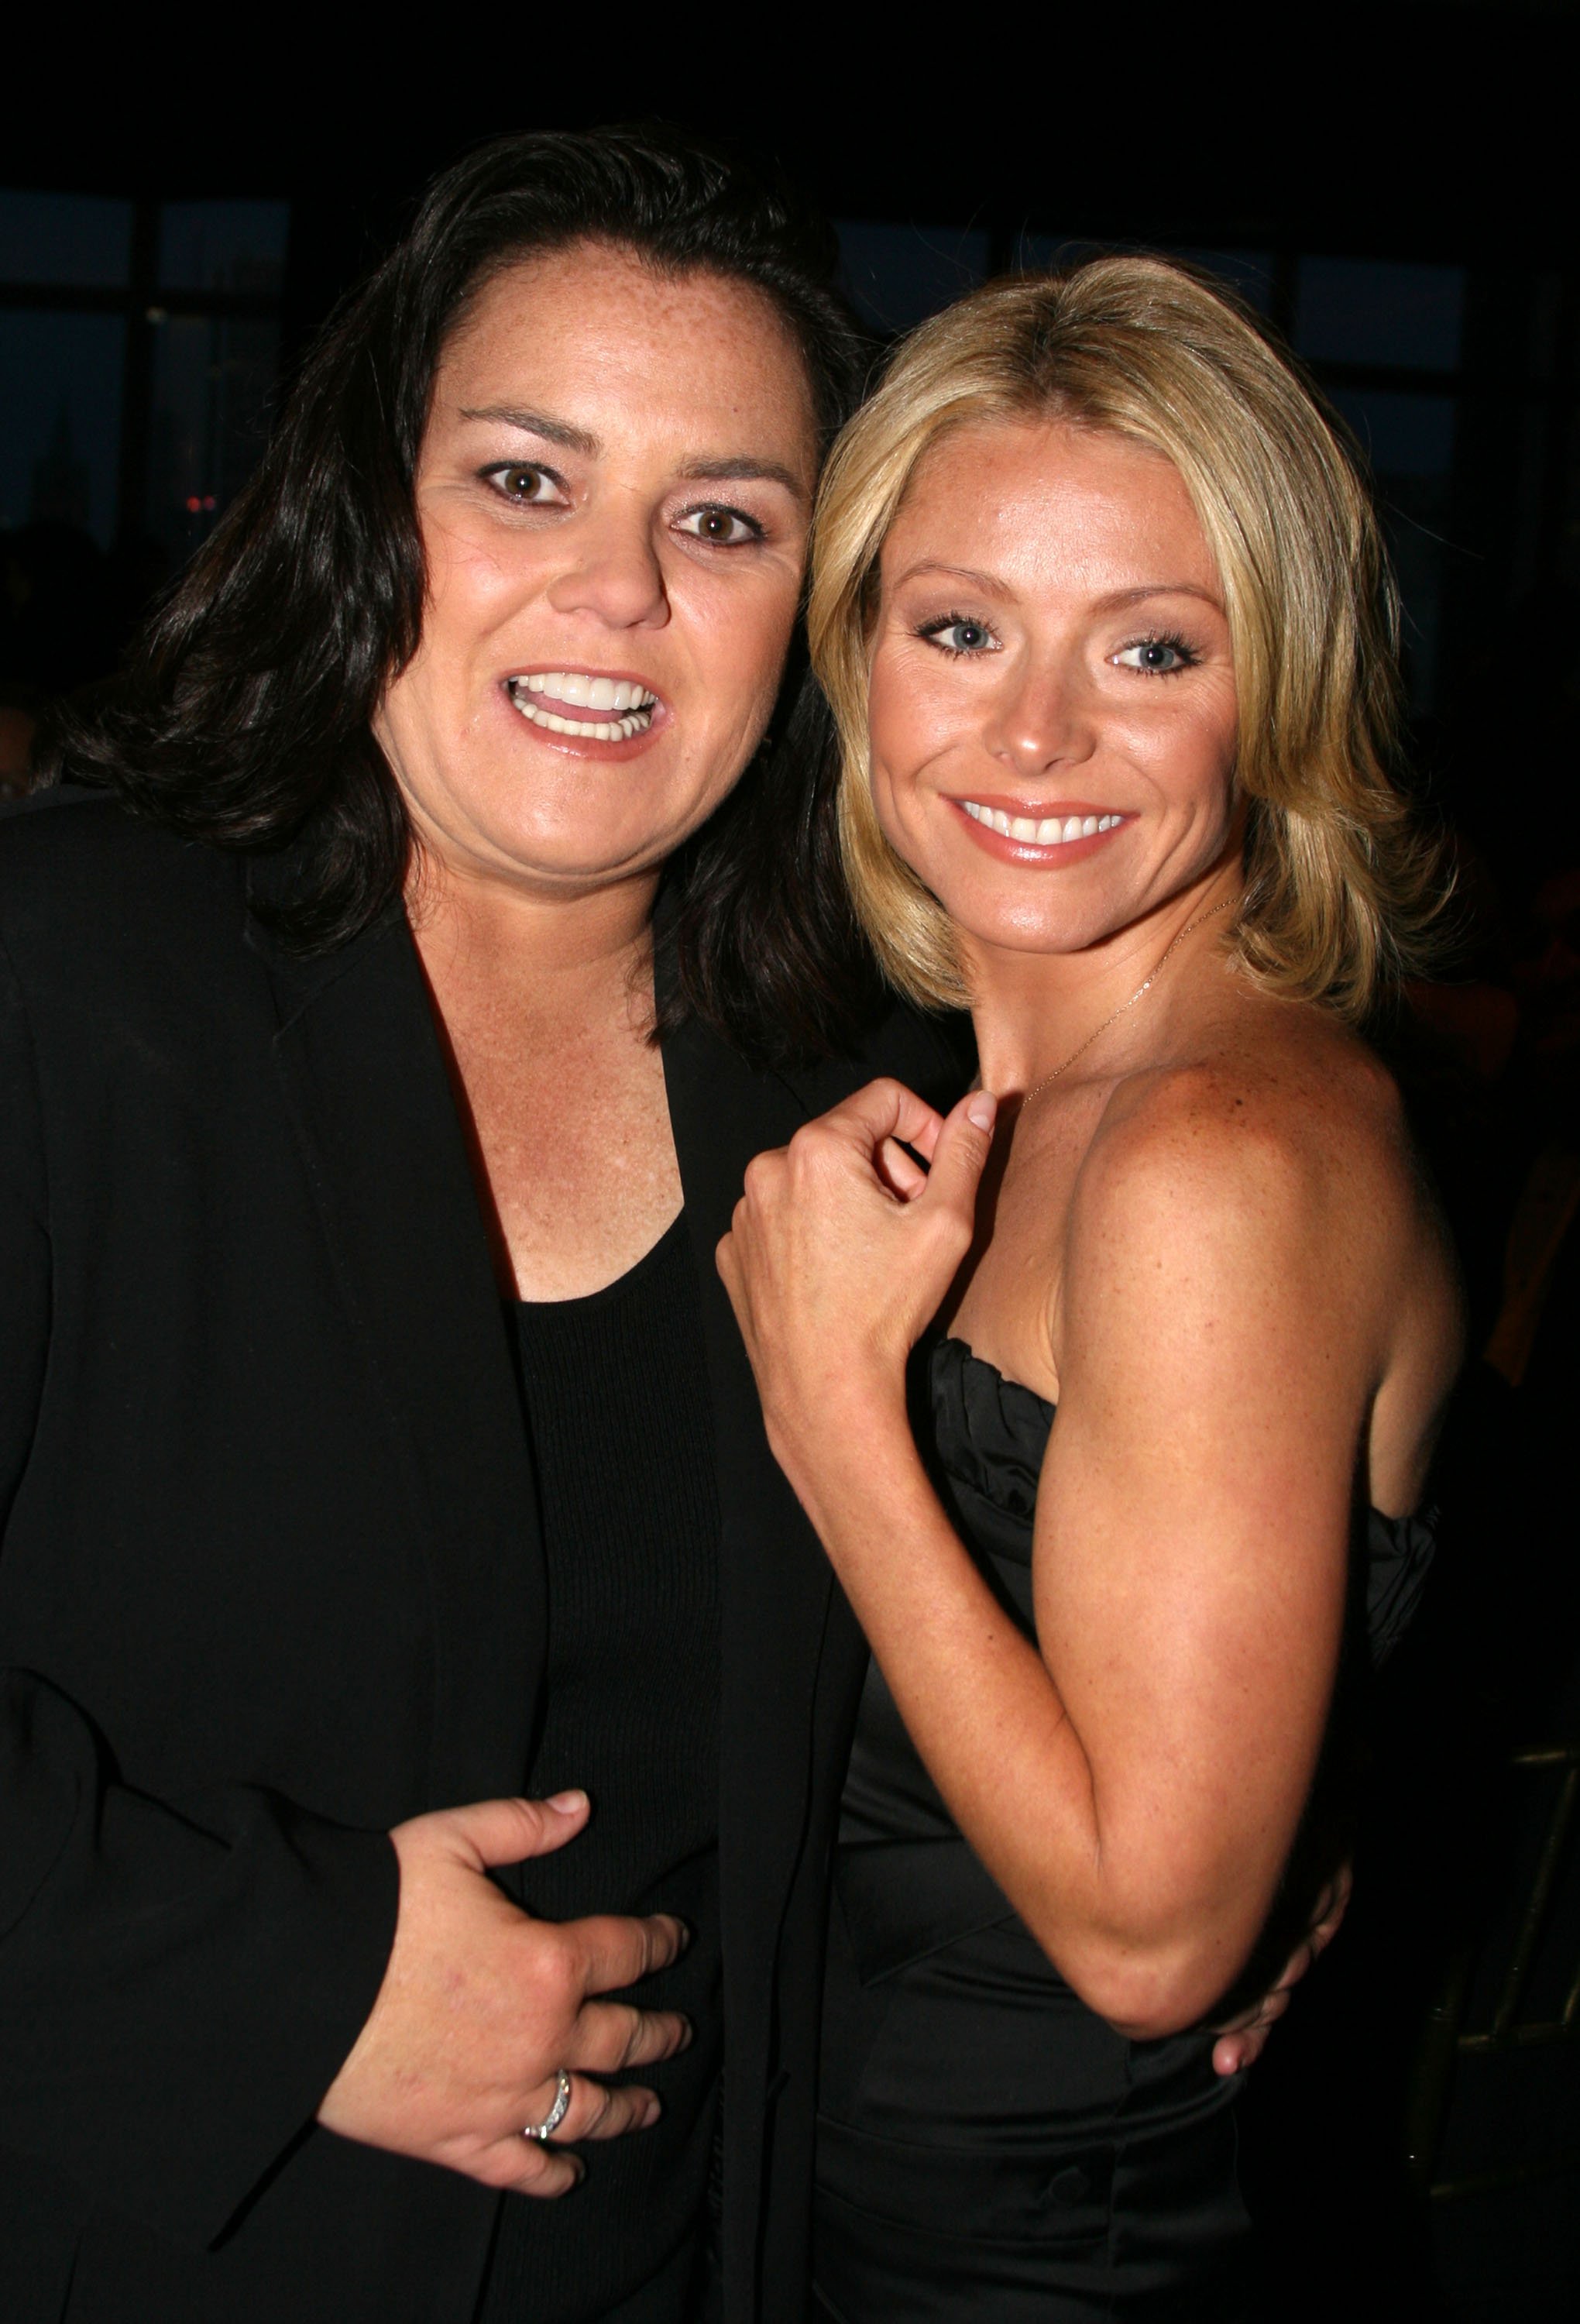 'The View' alum Rosie O'Donnell and 'Live with Kelly and Ryan' star Kelly Ripa stand arm-in-arm, both wearing black, during The Mandarin Oriental Hotel at Gilda's Club Annual Gala